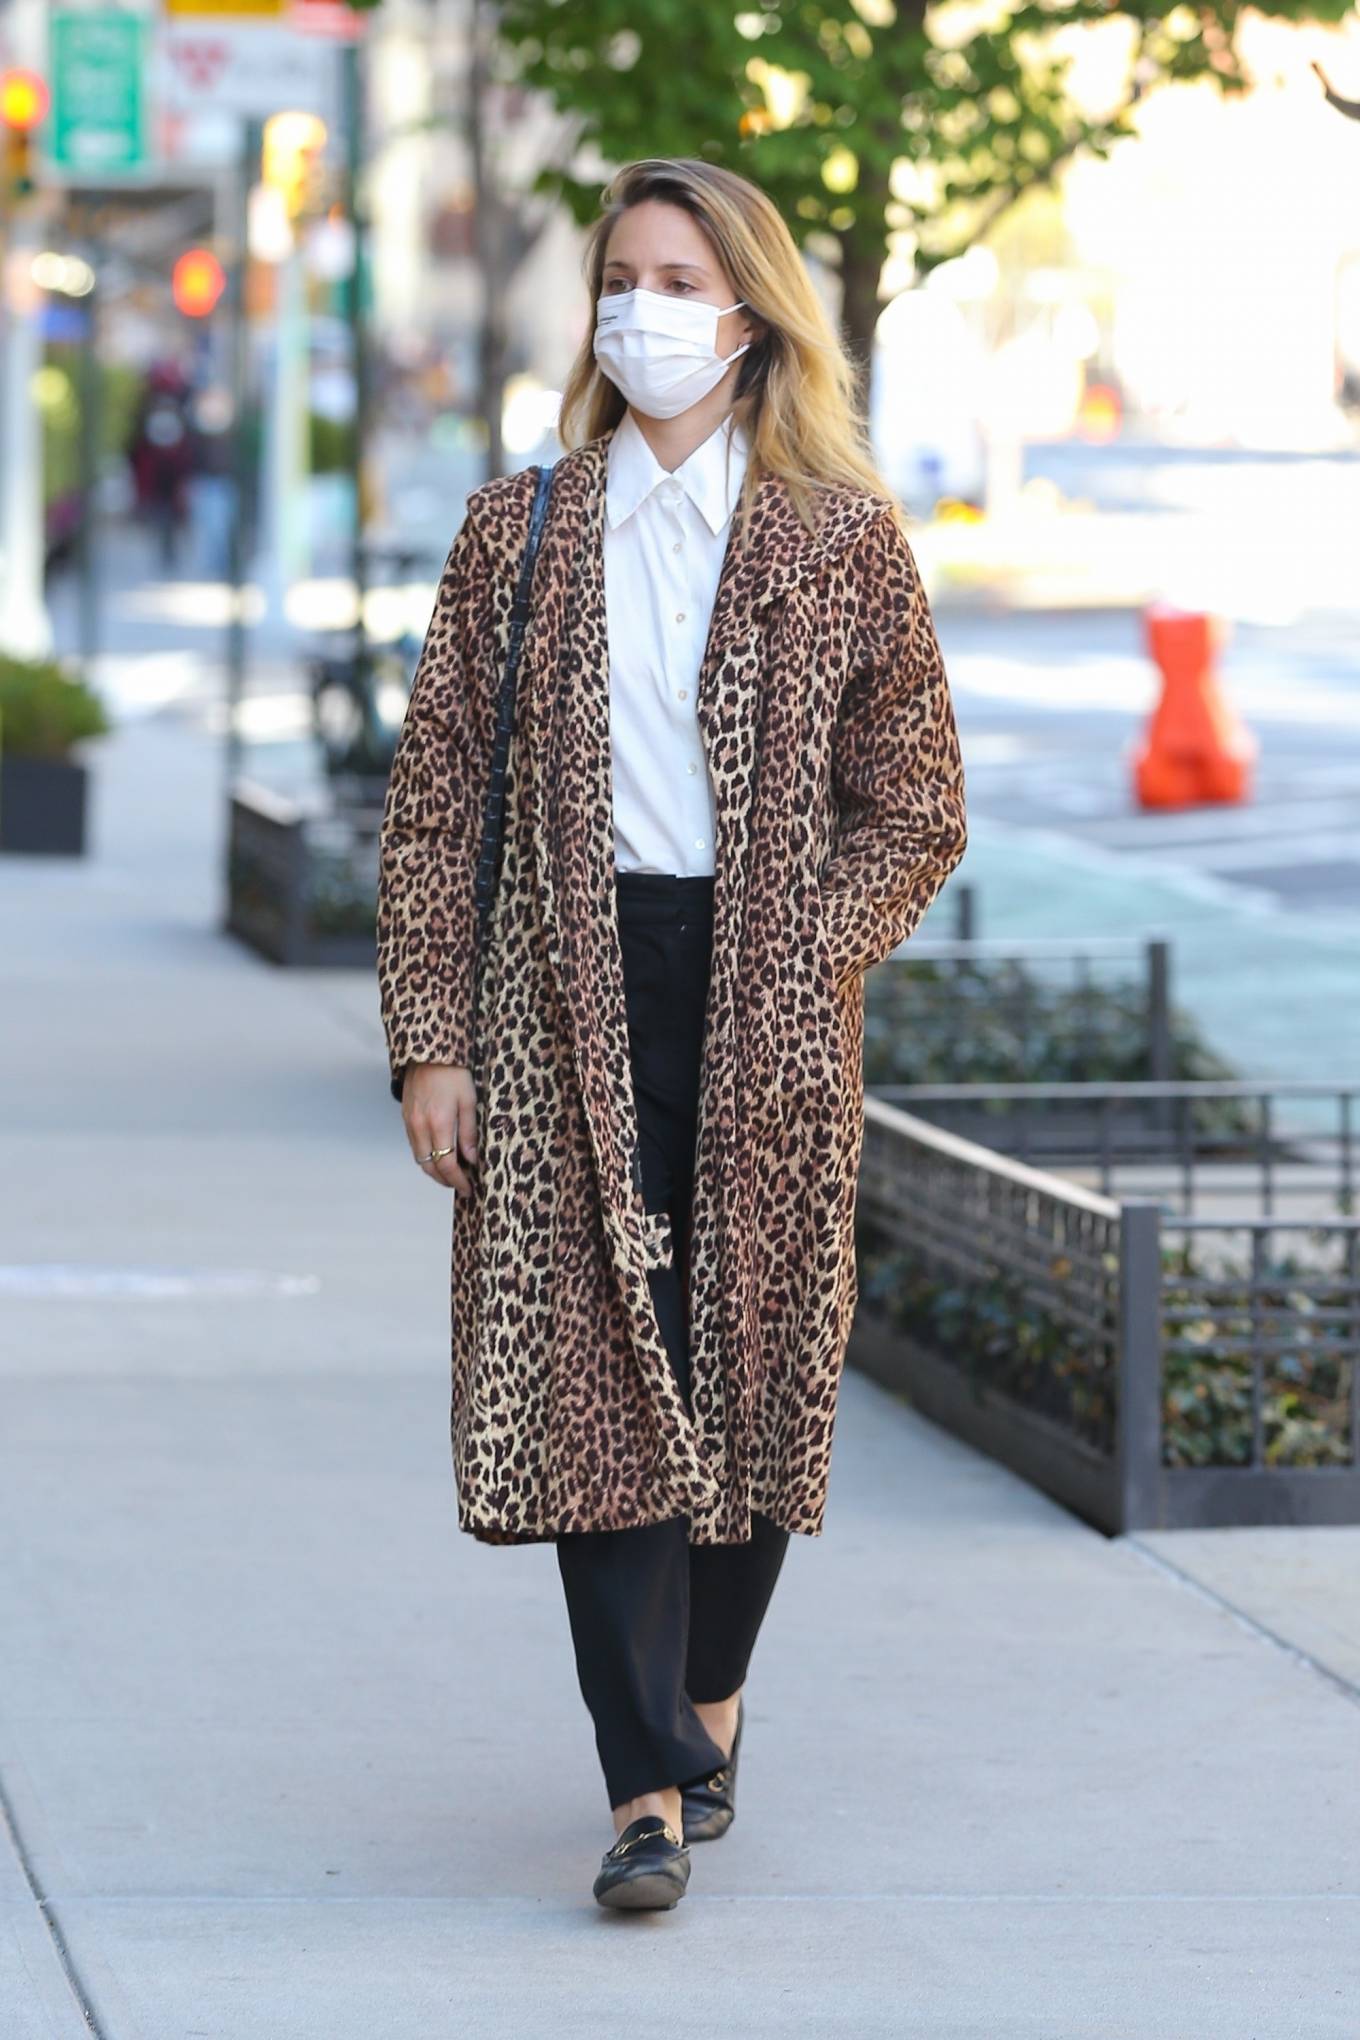 Dianna Agron 2021 : Dianna Agron – In a leopard print overcoat while out in New York-01